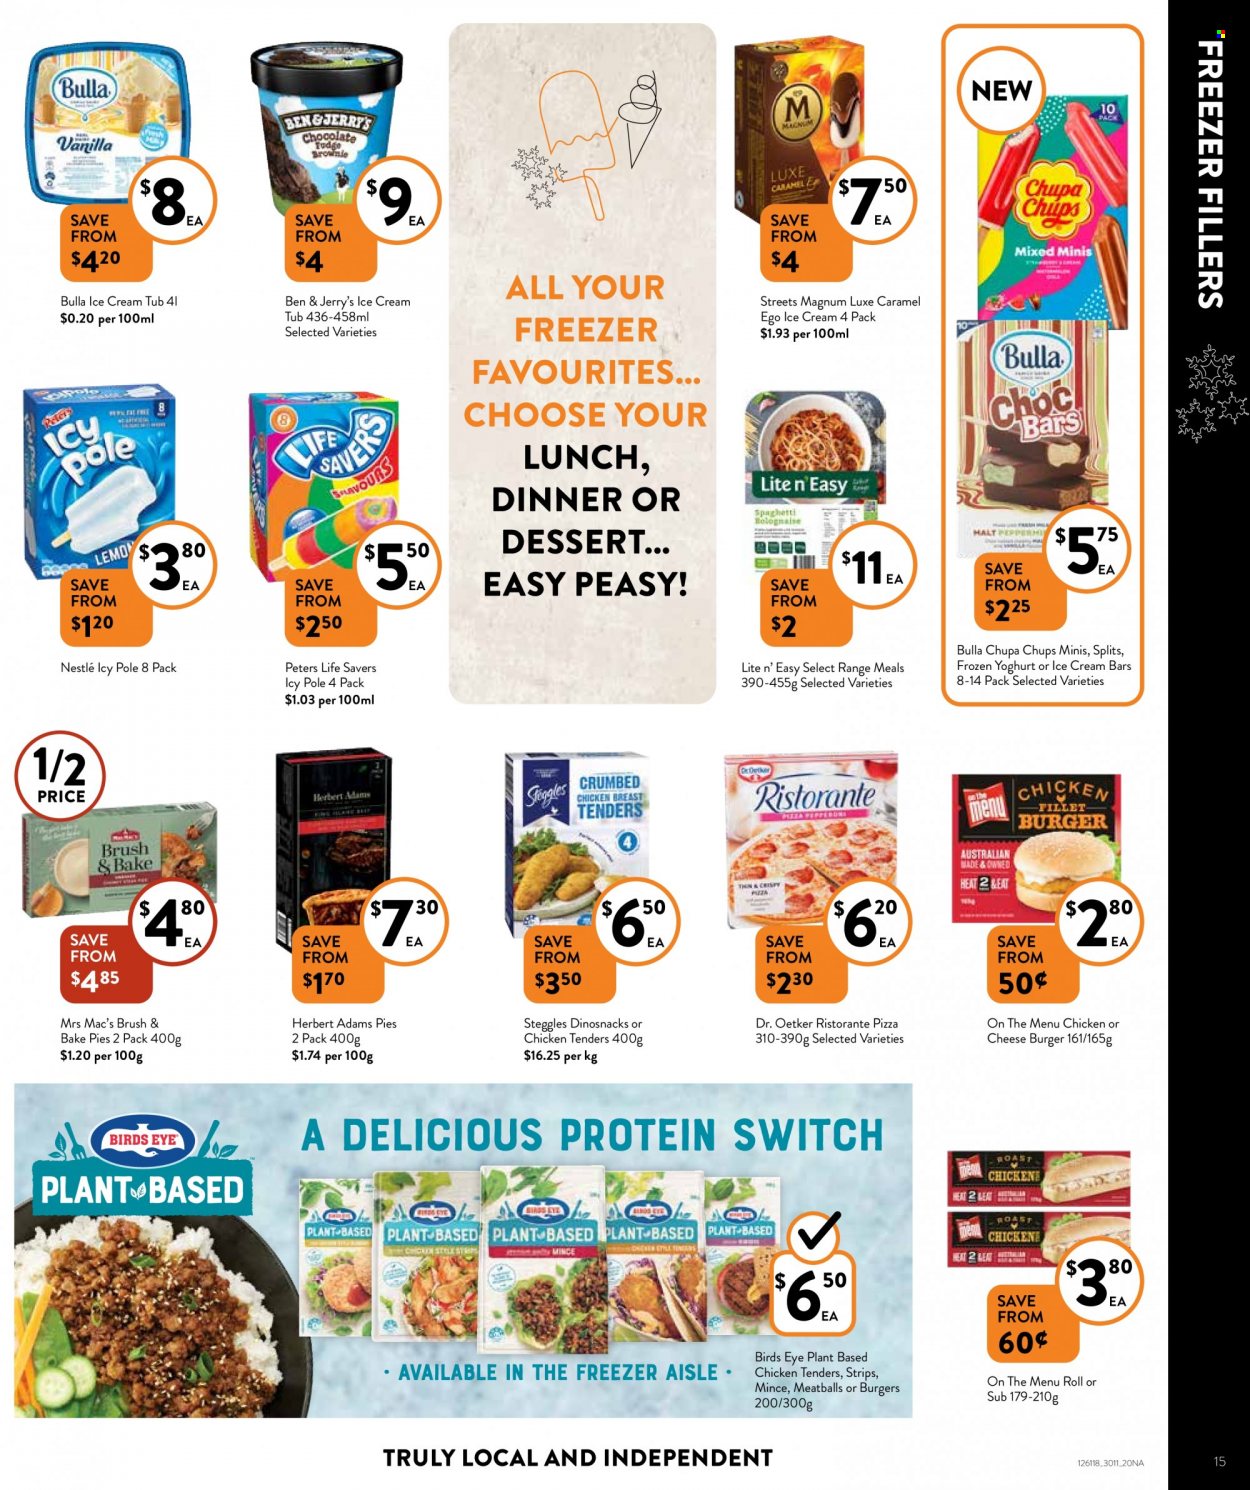 thumbnail - Foodworks Catalogue - 30 Nov 2022 - 6 Dec 2022 - Sales products - spaghetti, pizza, chicken tenders, meatballs, Bird's Eye, Dr. Oetker, yoghurt, Magnum, ice cream, ice cream bars, Ben & Jerry's, frozen yoghurt, strips, Nestlé, Ego, switch, TRULY, brush. Page 15.